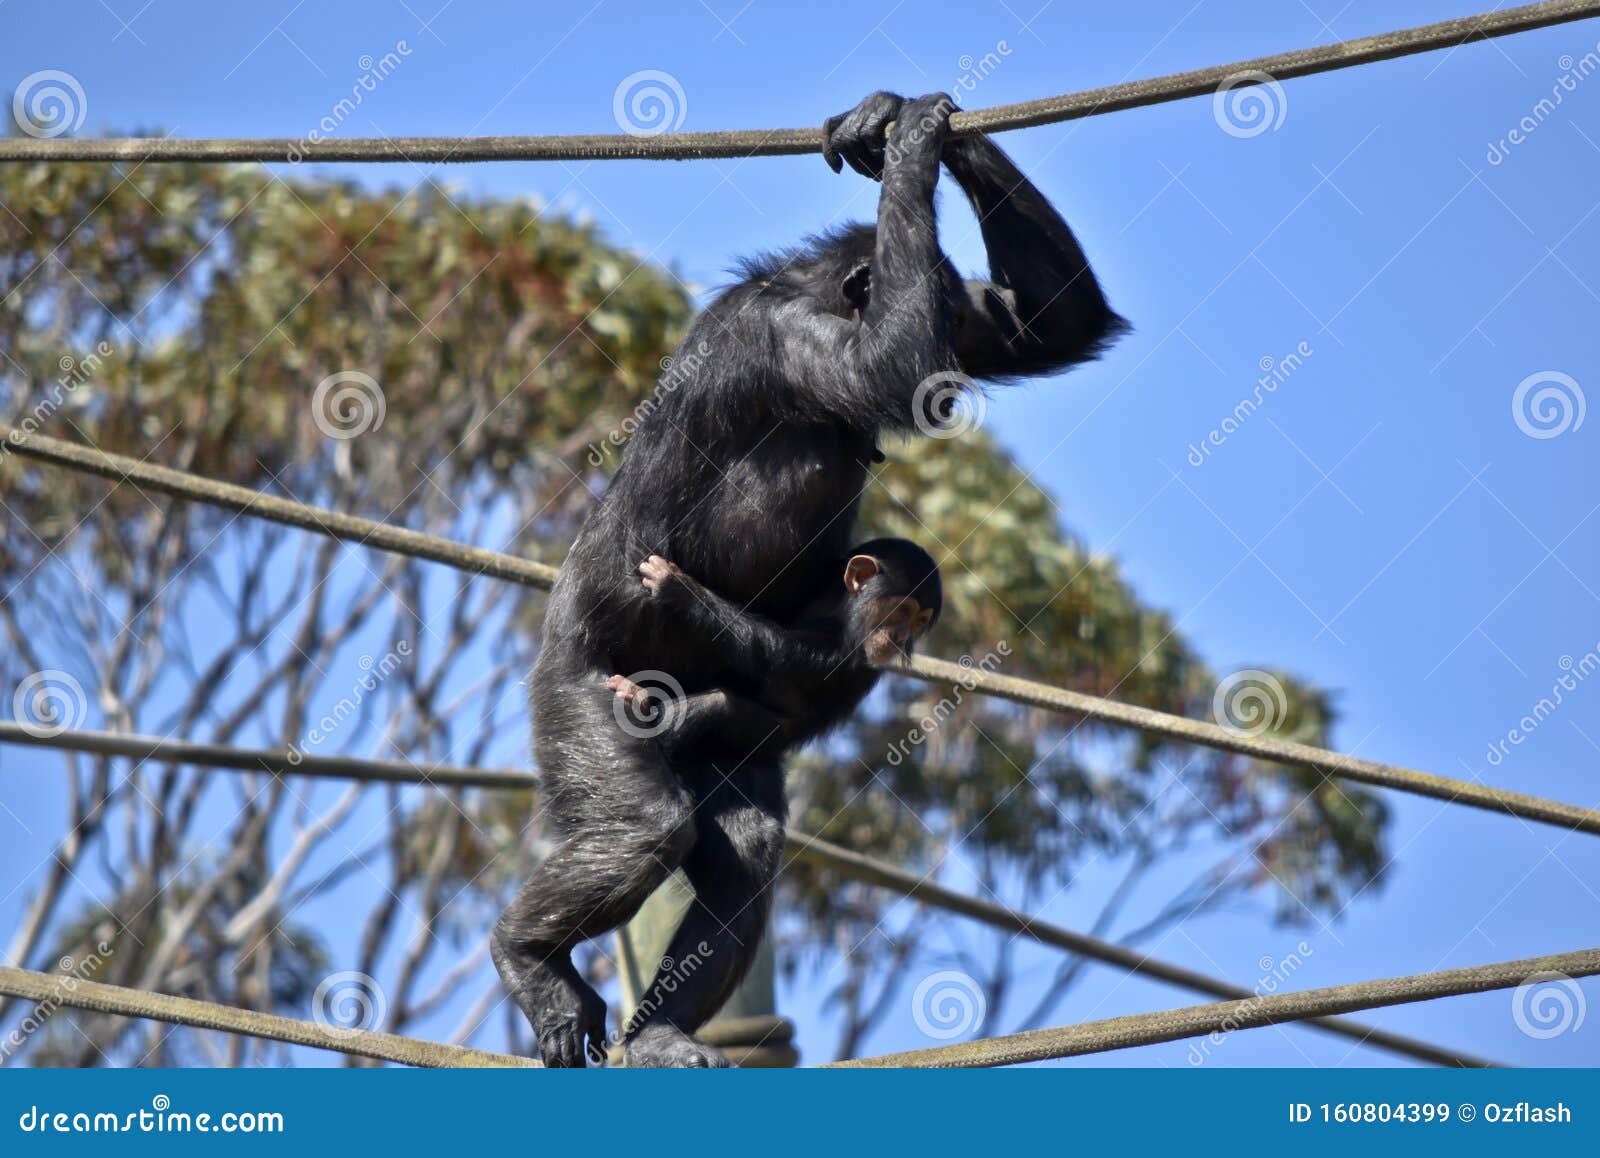 the chimpanzee baby is holding onto its miother